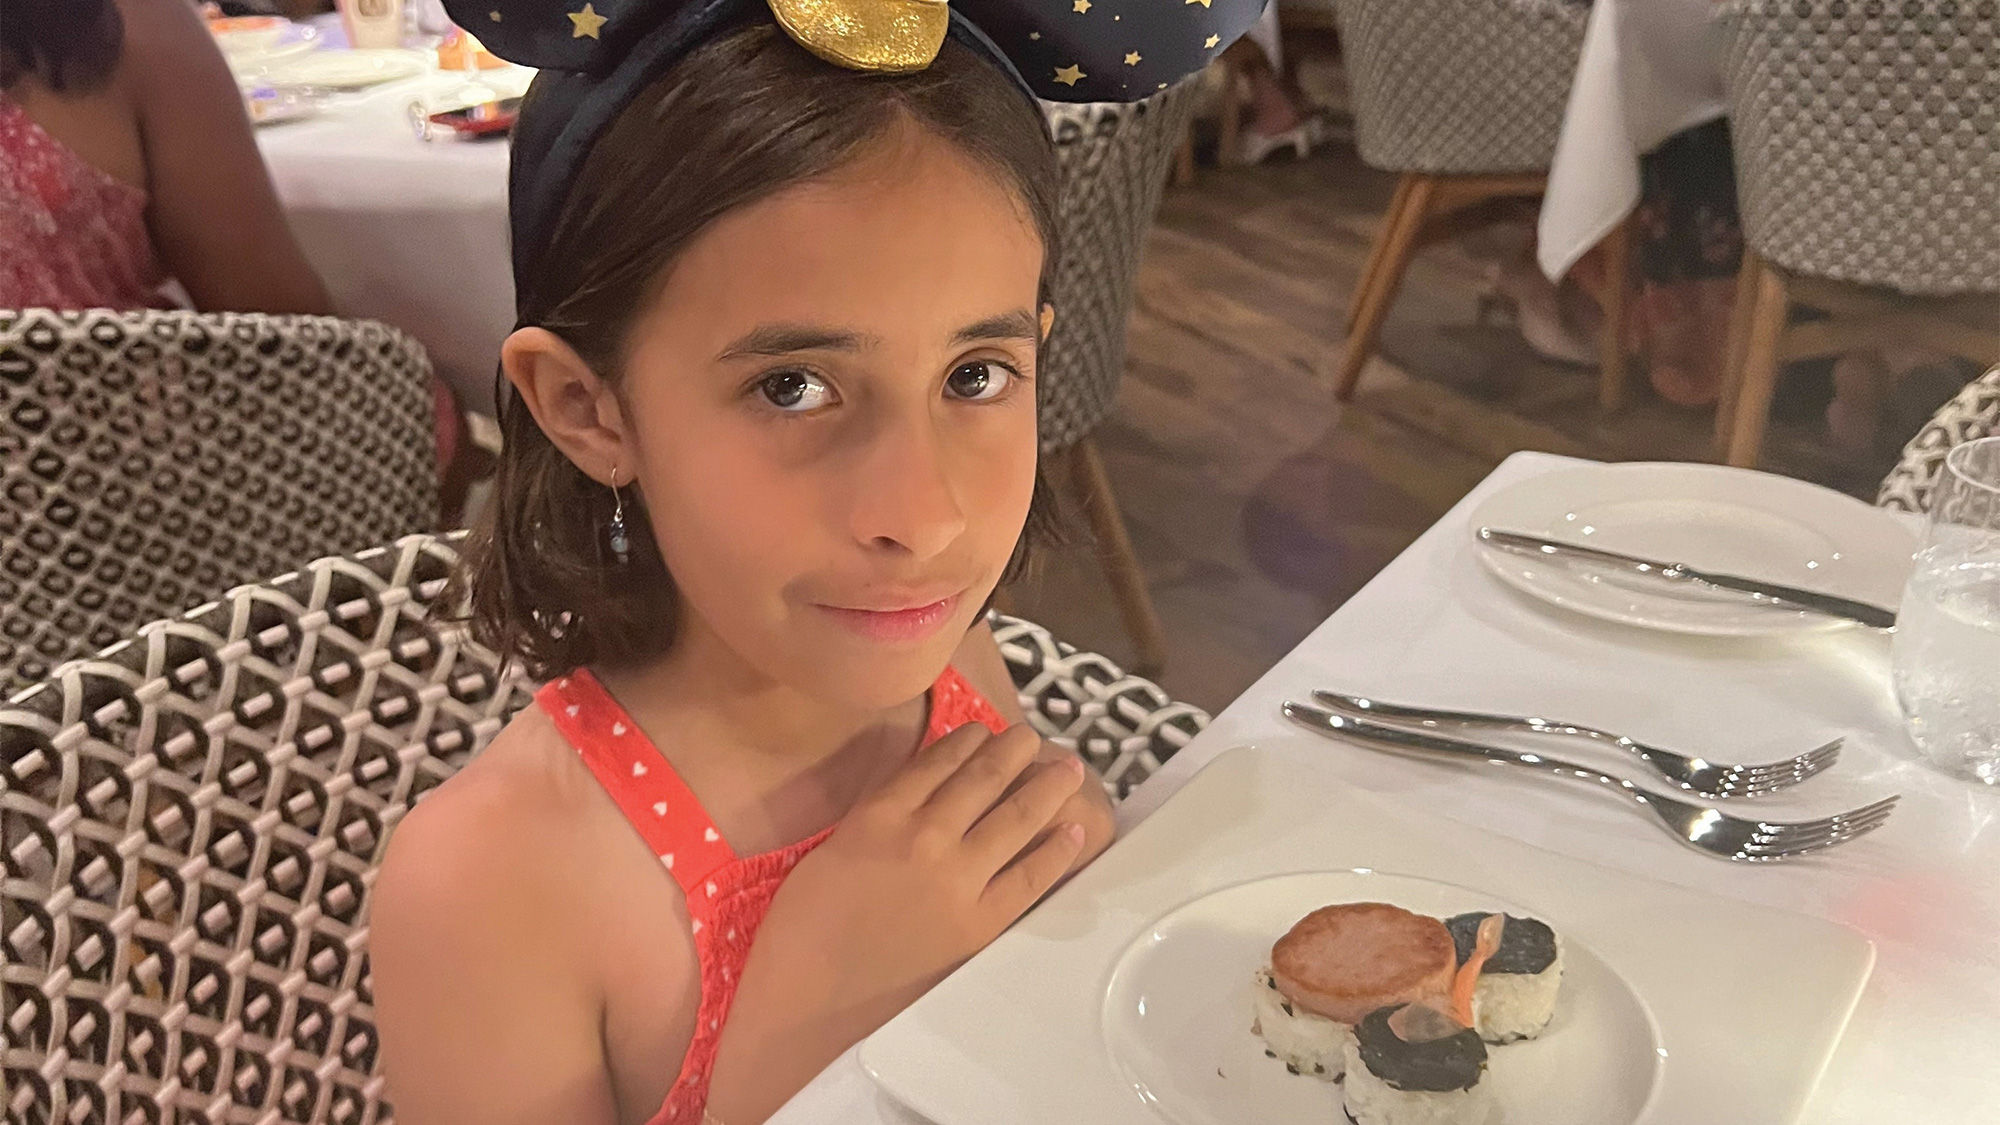 The writer's daughter liked the rice and the nori in the mouse ear musubi served at the Aulani's Ama Ama restaurant.